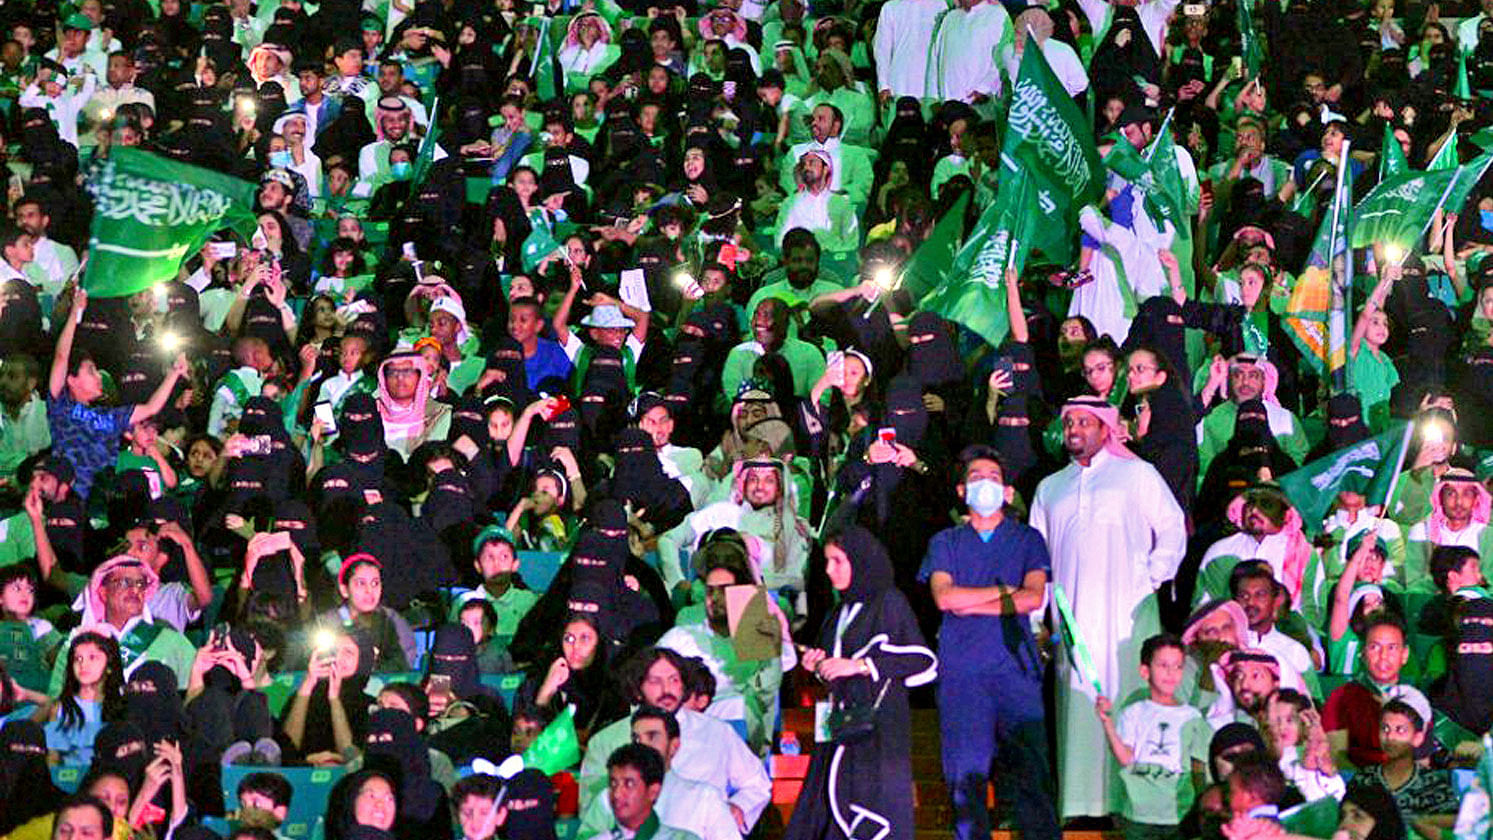 Saudi women were allowed into a sports stadium for the first time on Friday, 12 January, to watch a soccer match.